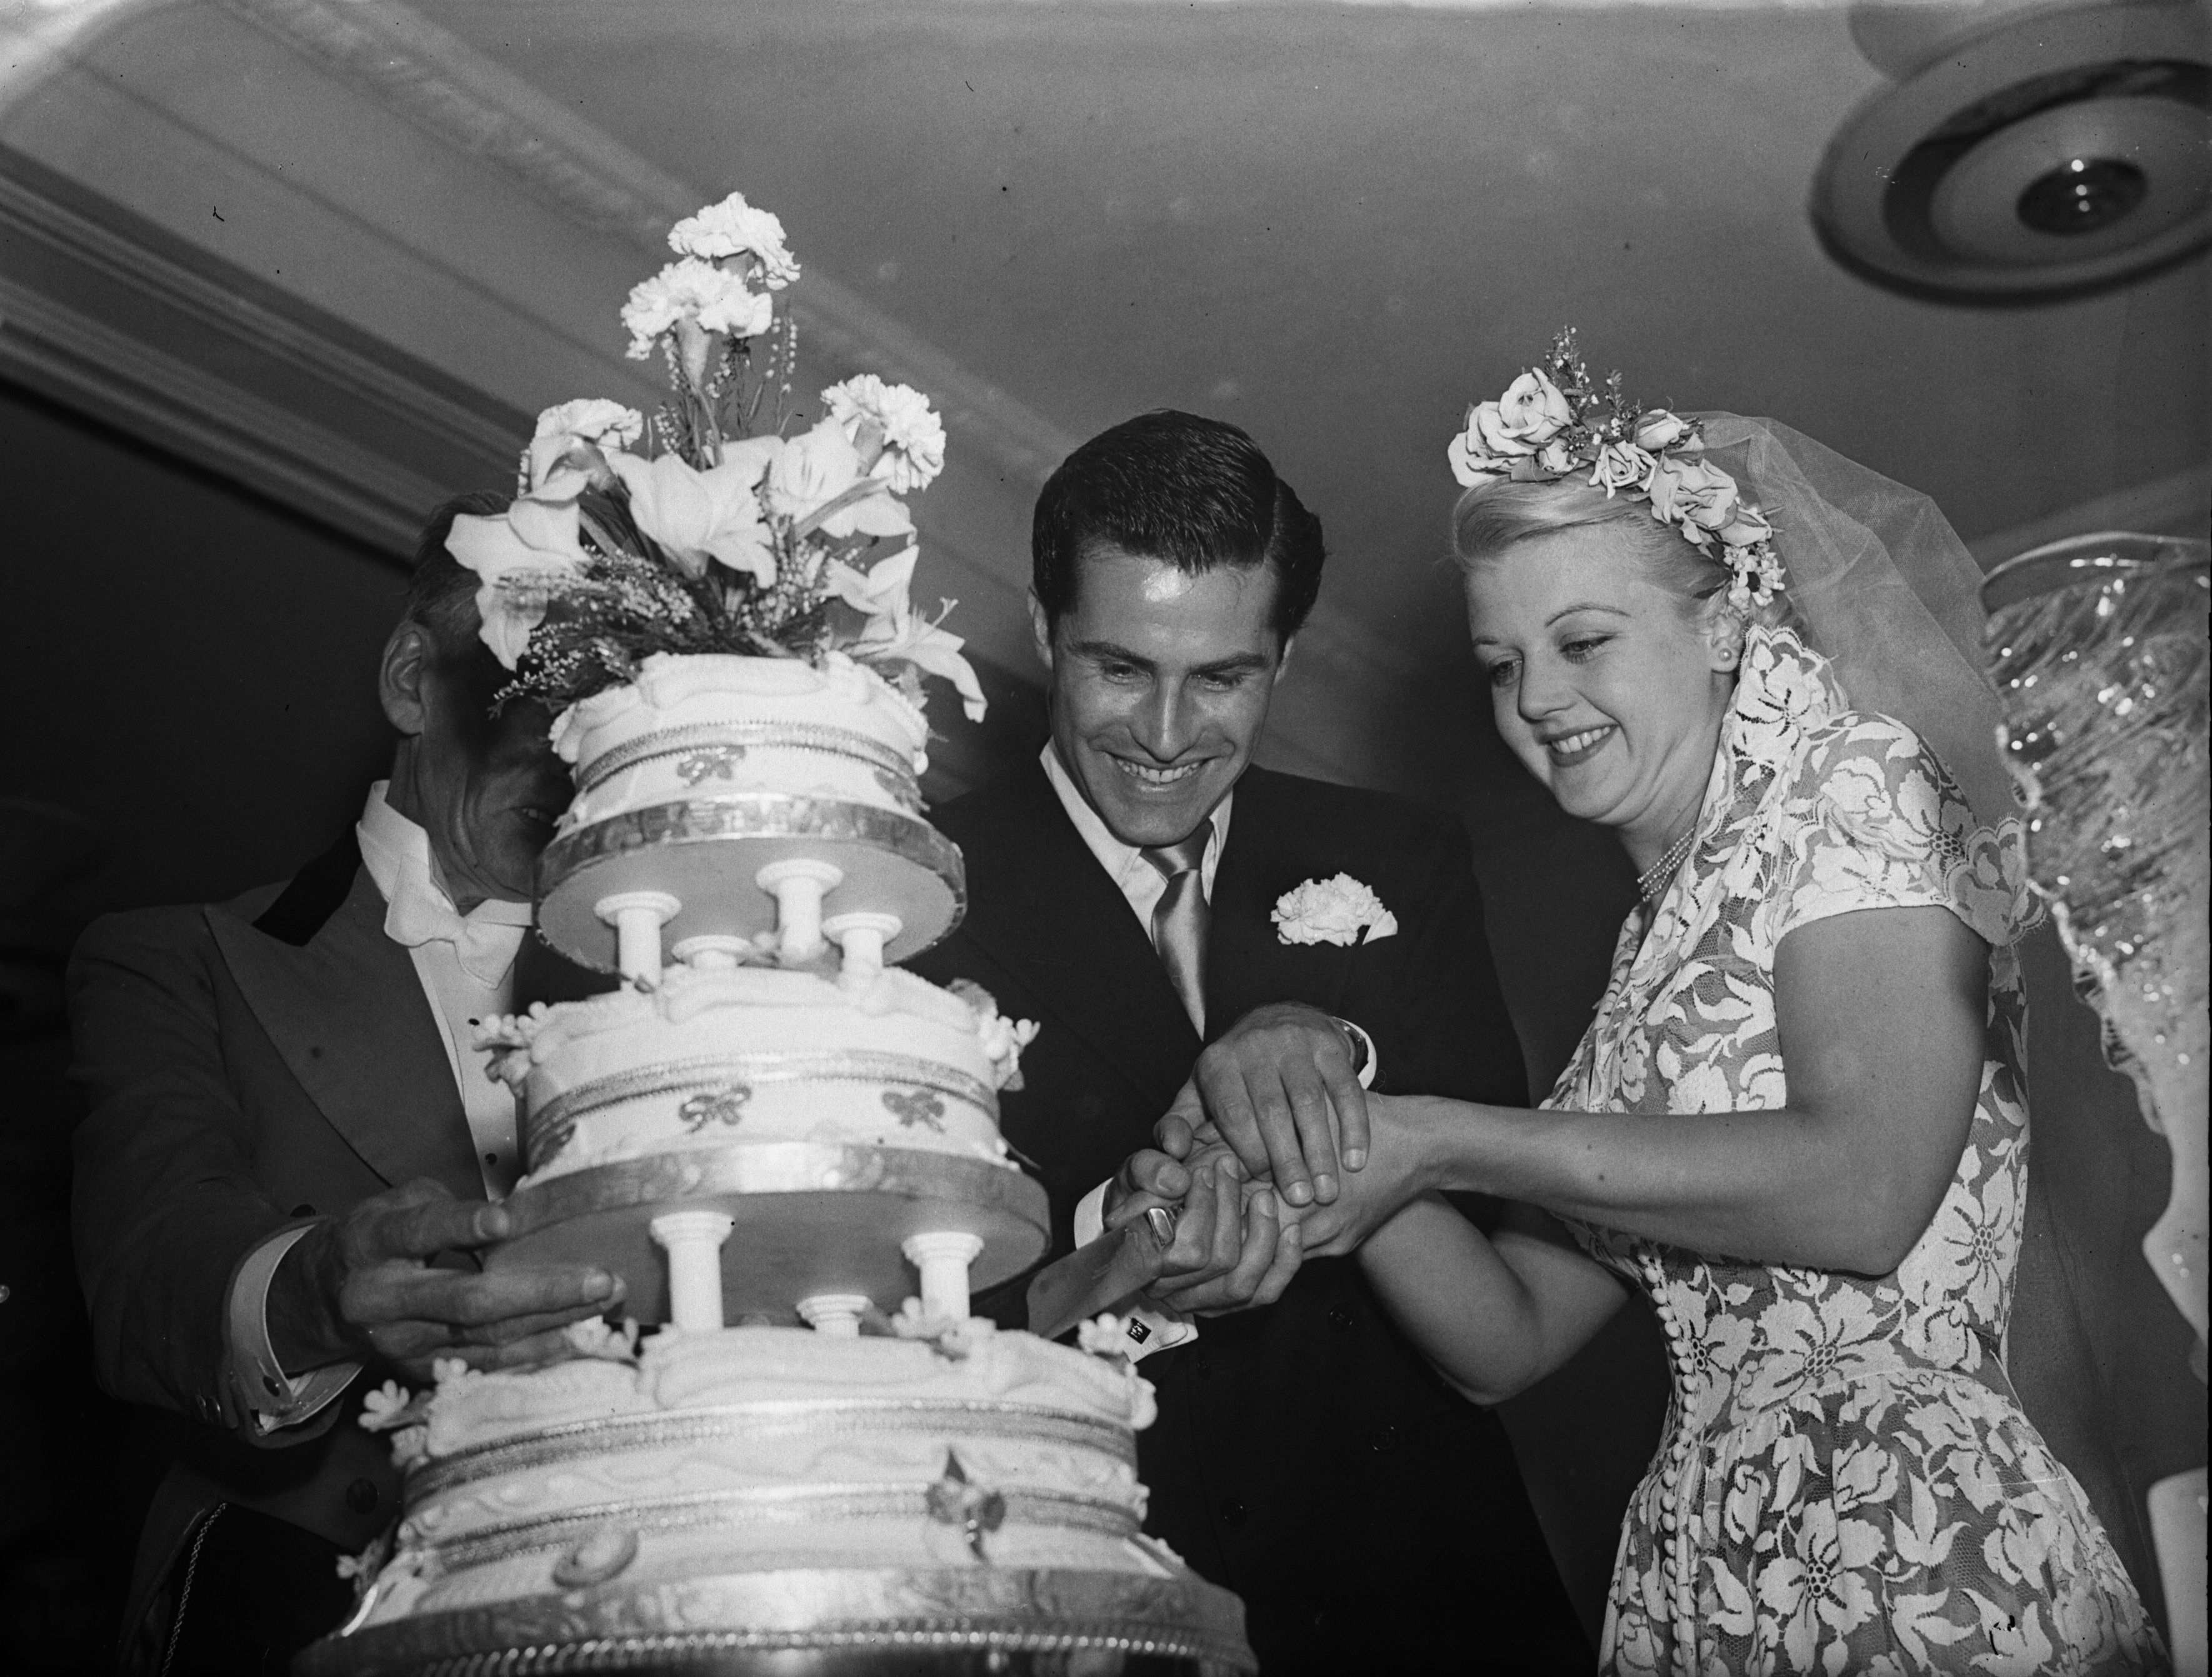 British actress Angela Lansbury and her husband, Peter Shaw, cutting the cake at their wedding. | Source: Getty Images